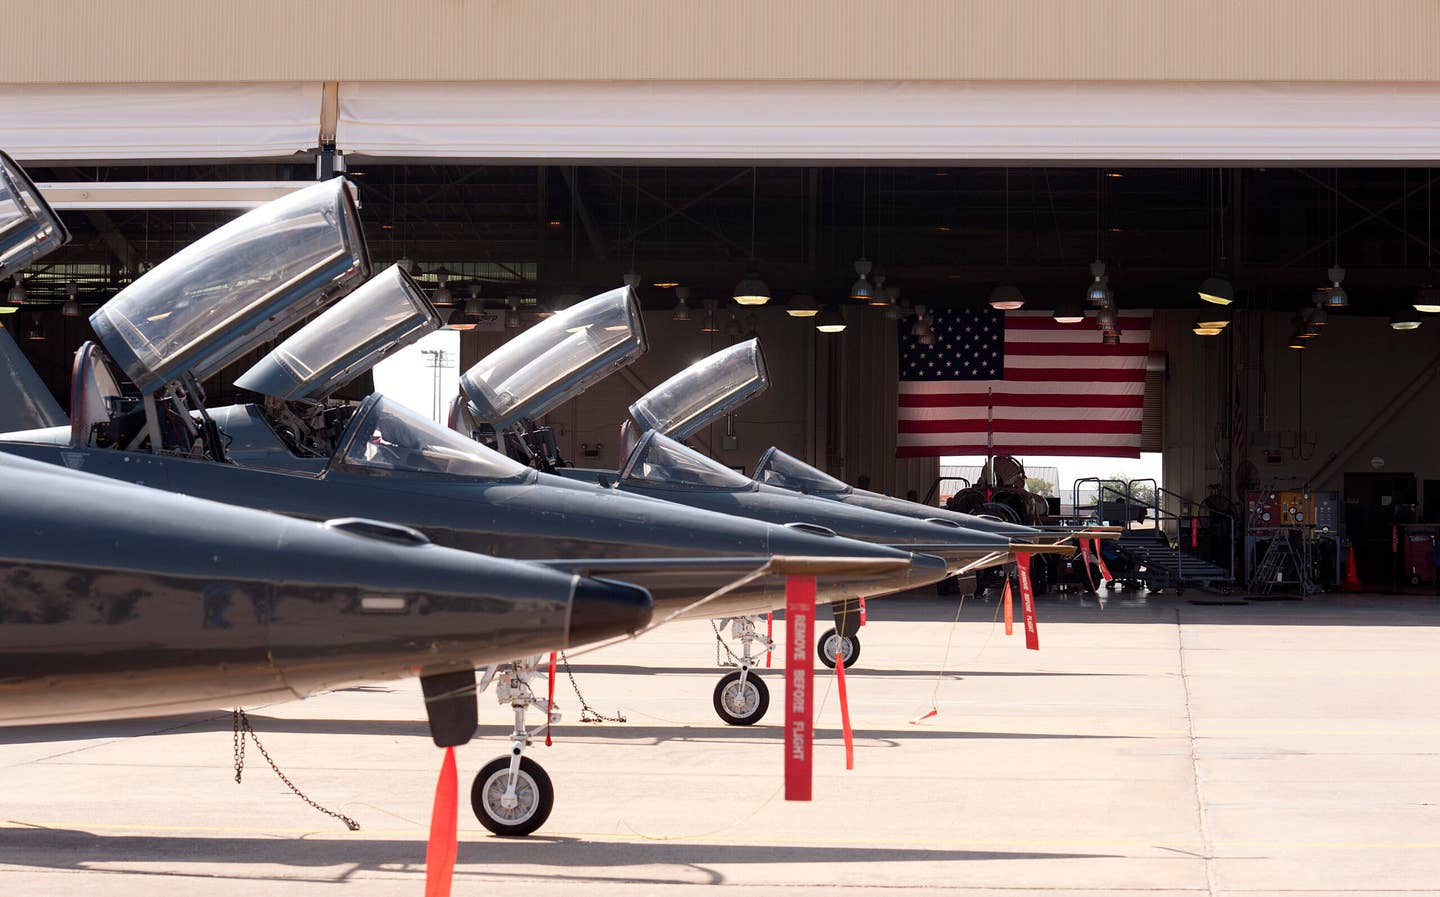 The 80th Flying Training Wing, T-38’s Talon aligned in a row outside the maintenance hangar at Sheppard Air Force Base, Texas, on Aug. 26, 2014. The Euro-NATO Joint Jet Pilot Training program is the world's only multi-nationally manned and managed flying training program. There are 13 NATO countries which participate in the 55-week program, flying the T-6 Texan II and the T-38C Talon. (U.S. Air Force Photo by Danny Webb/Released)